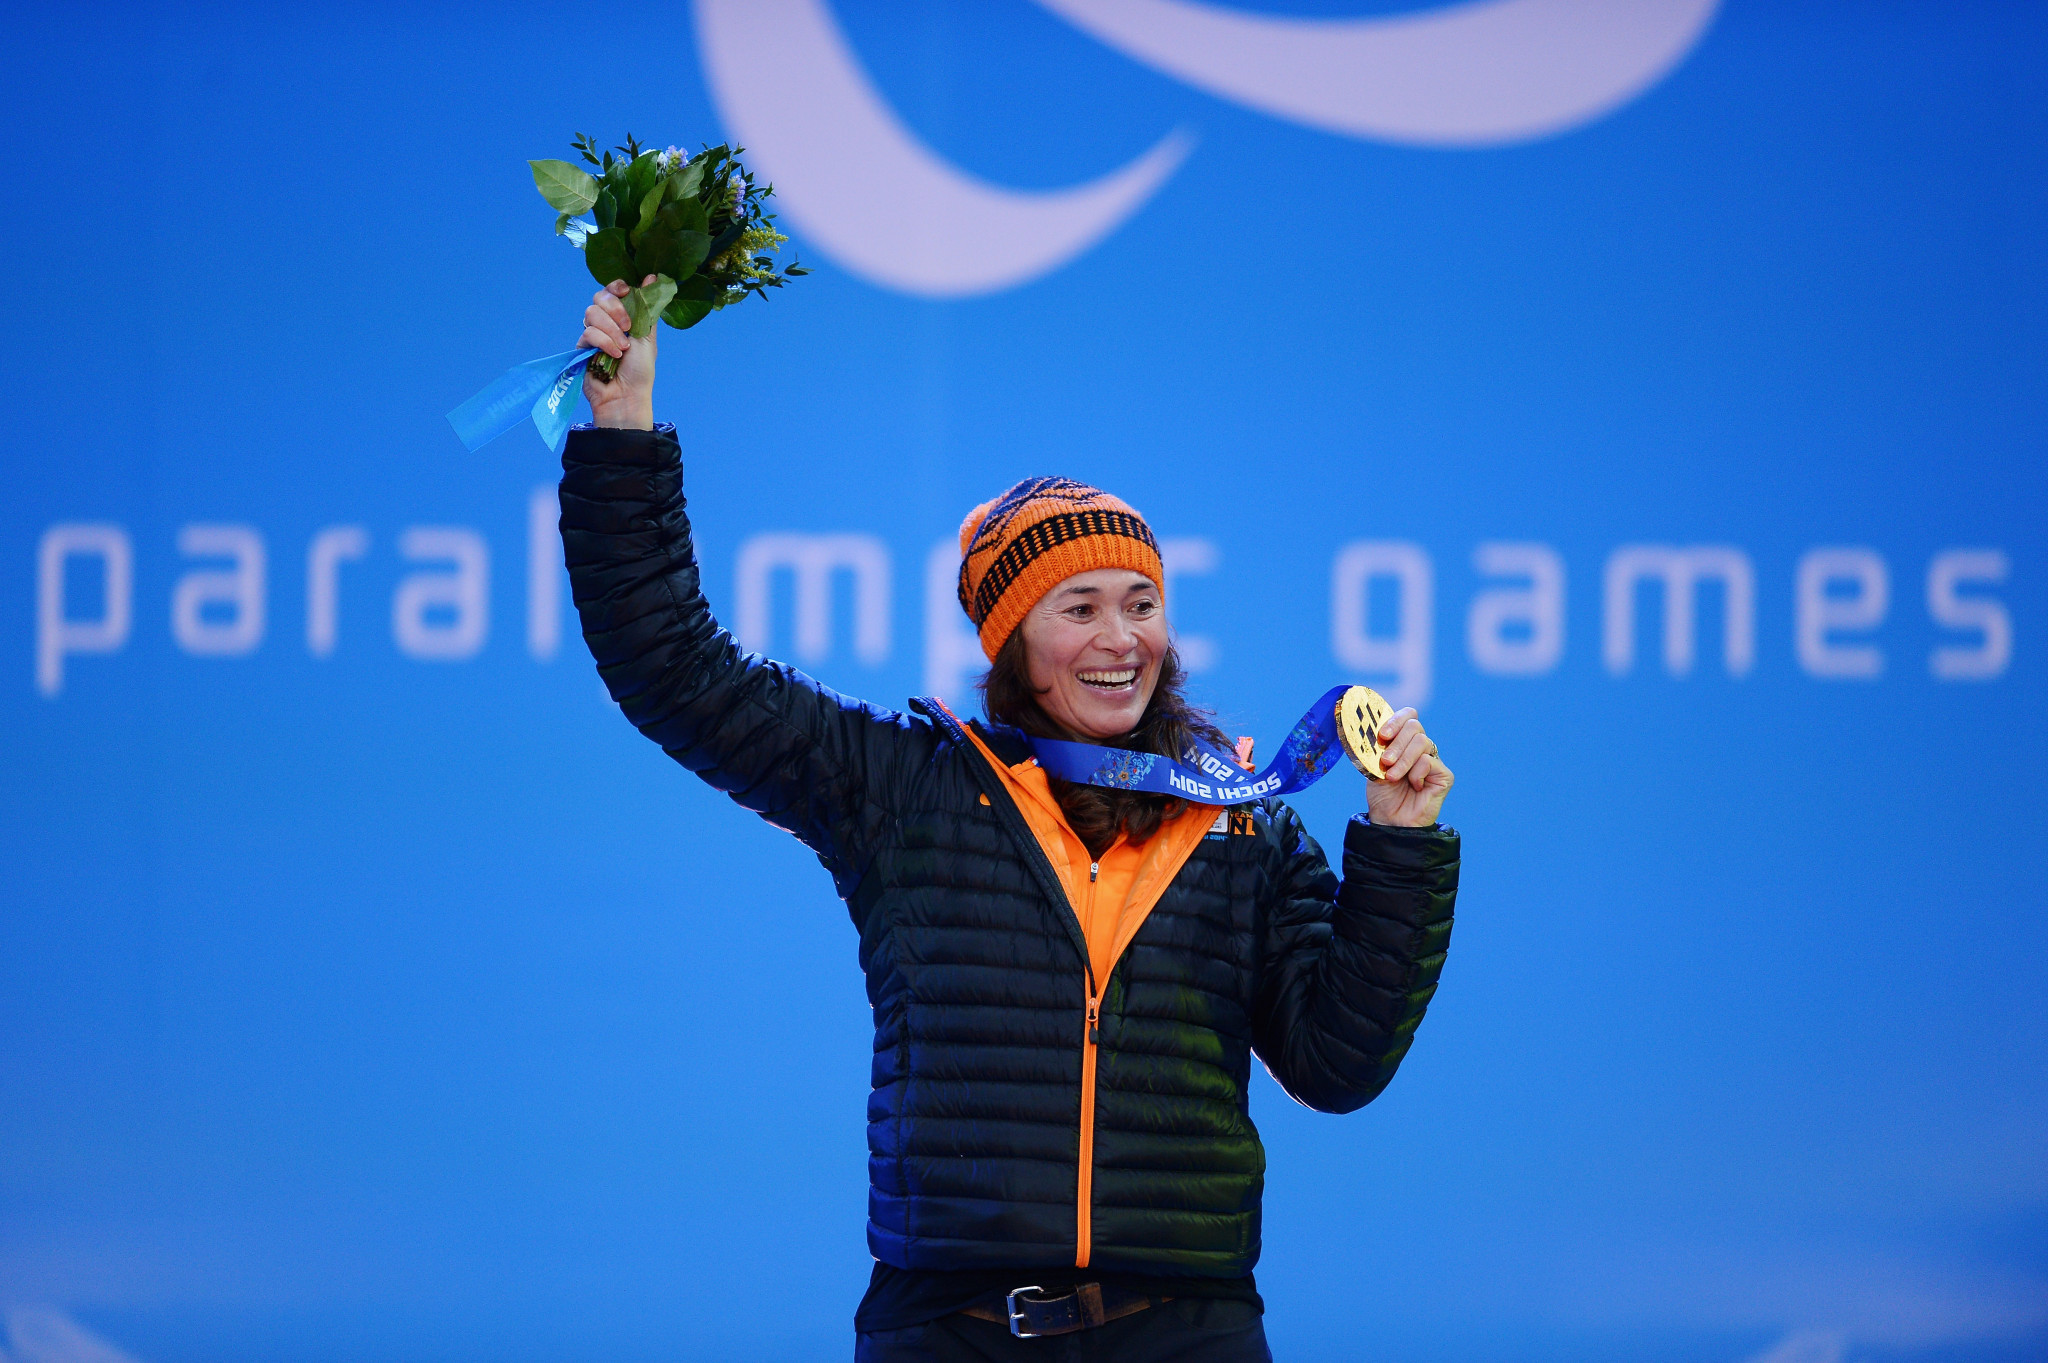 Bibian Mentel-Spree won two golds at the 2018 Pyeongchang Winter Olympics and one gold at the 2014 Sochi Winter Olympics ©Getty Images